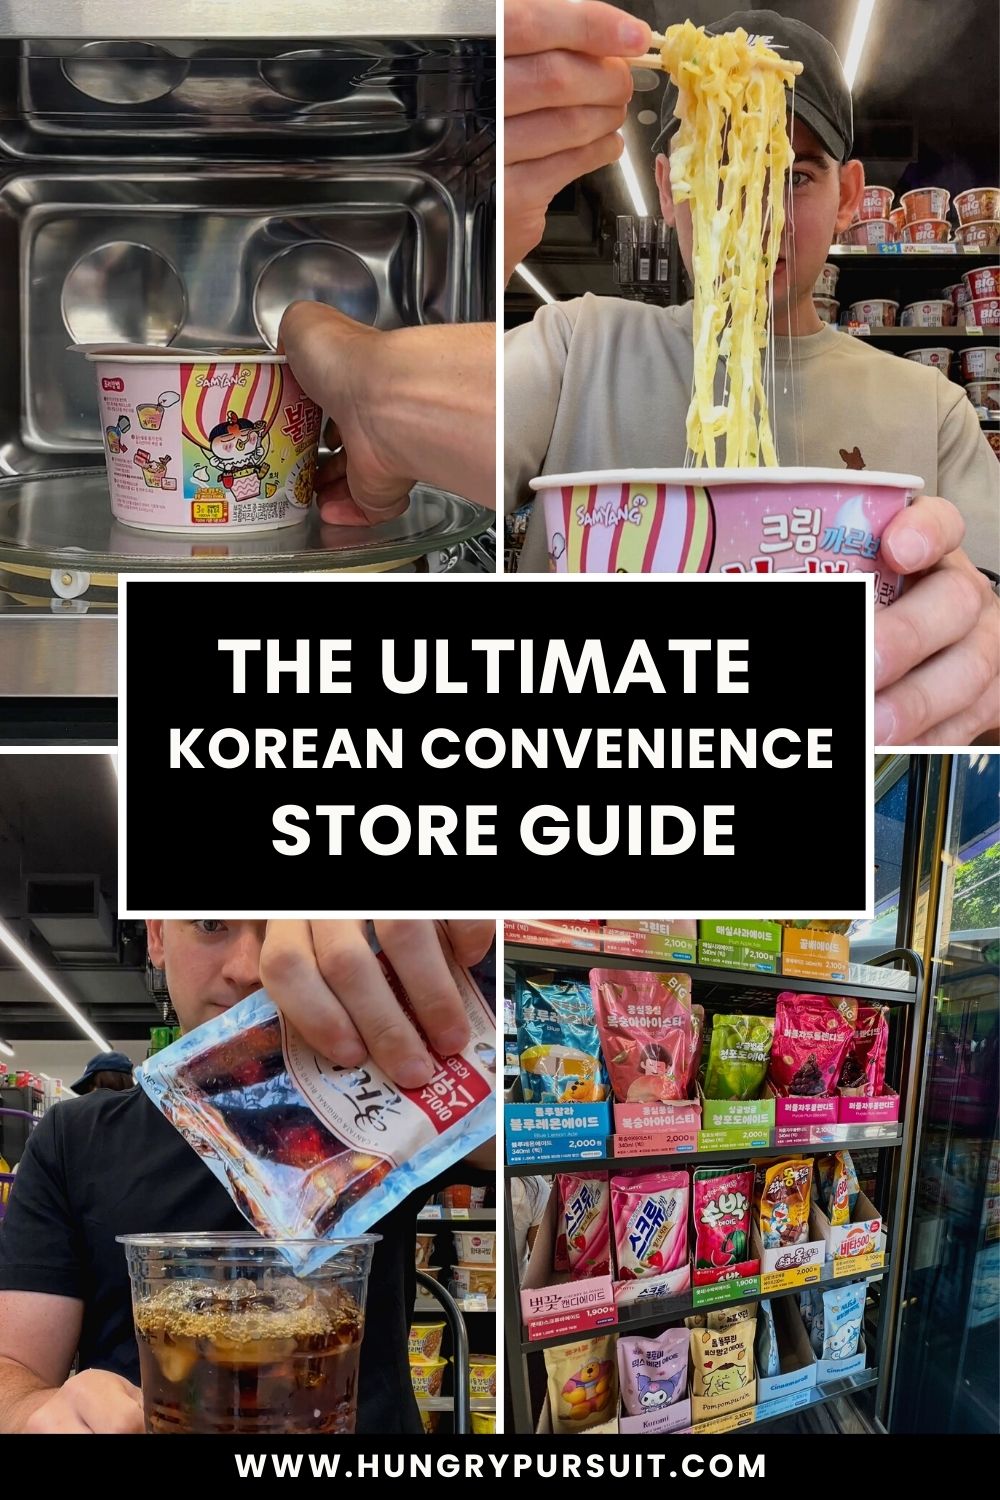 Korean convenience store collage featuring viral ramen and dining tips